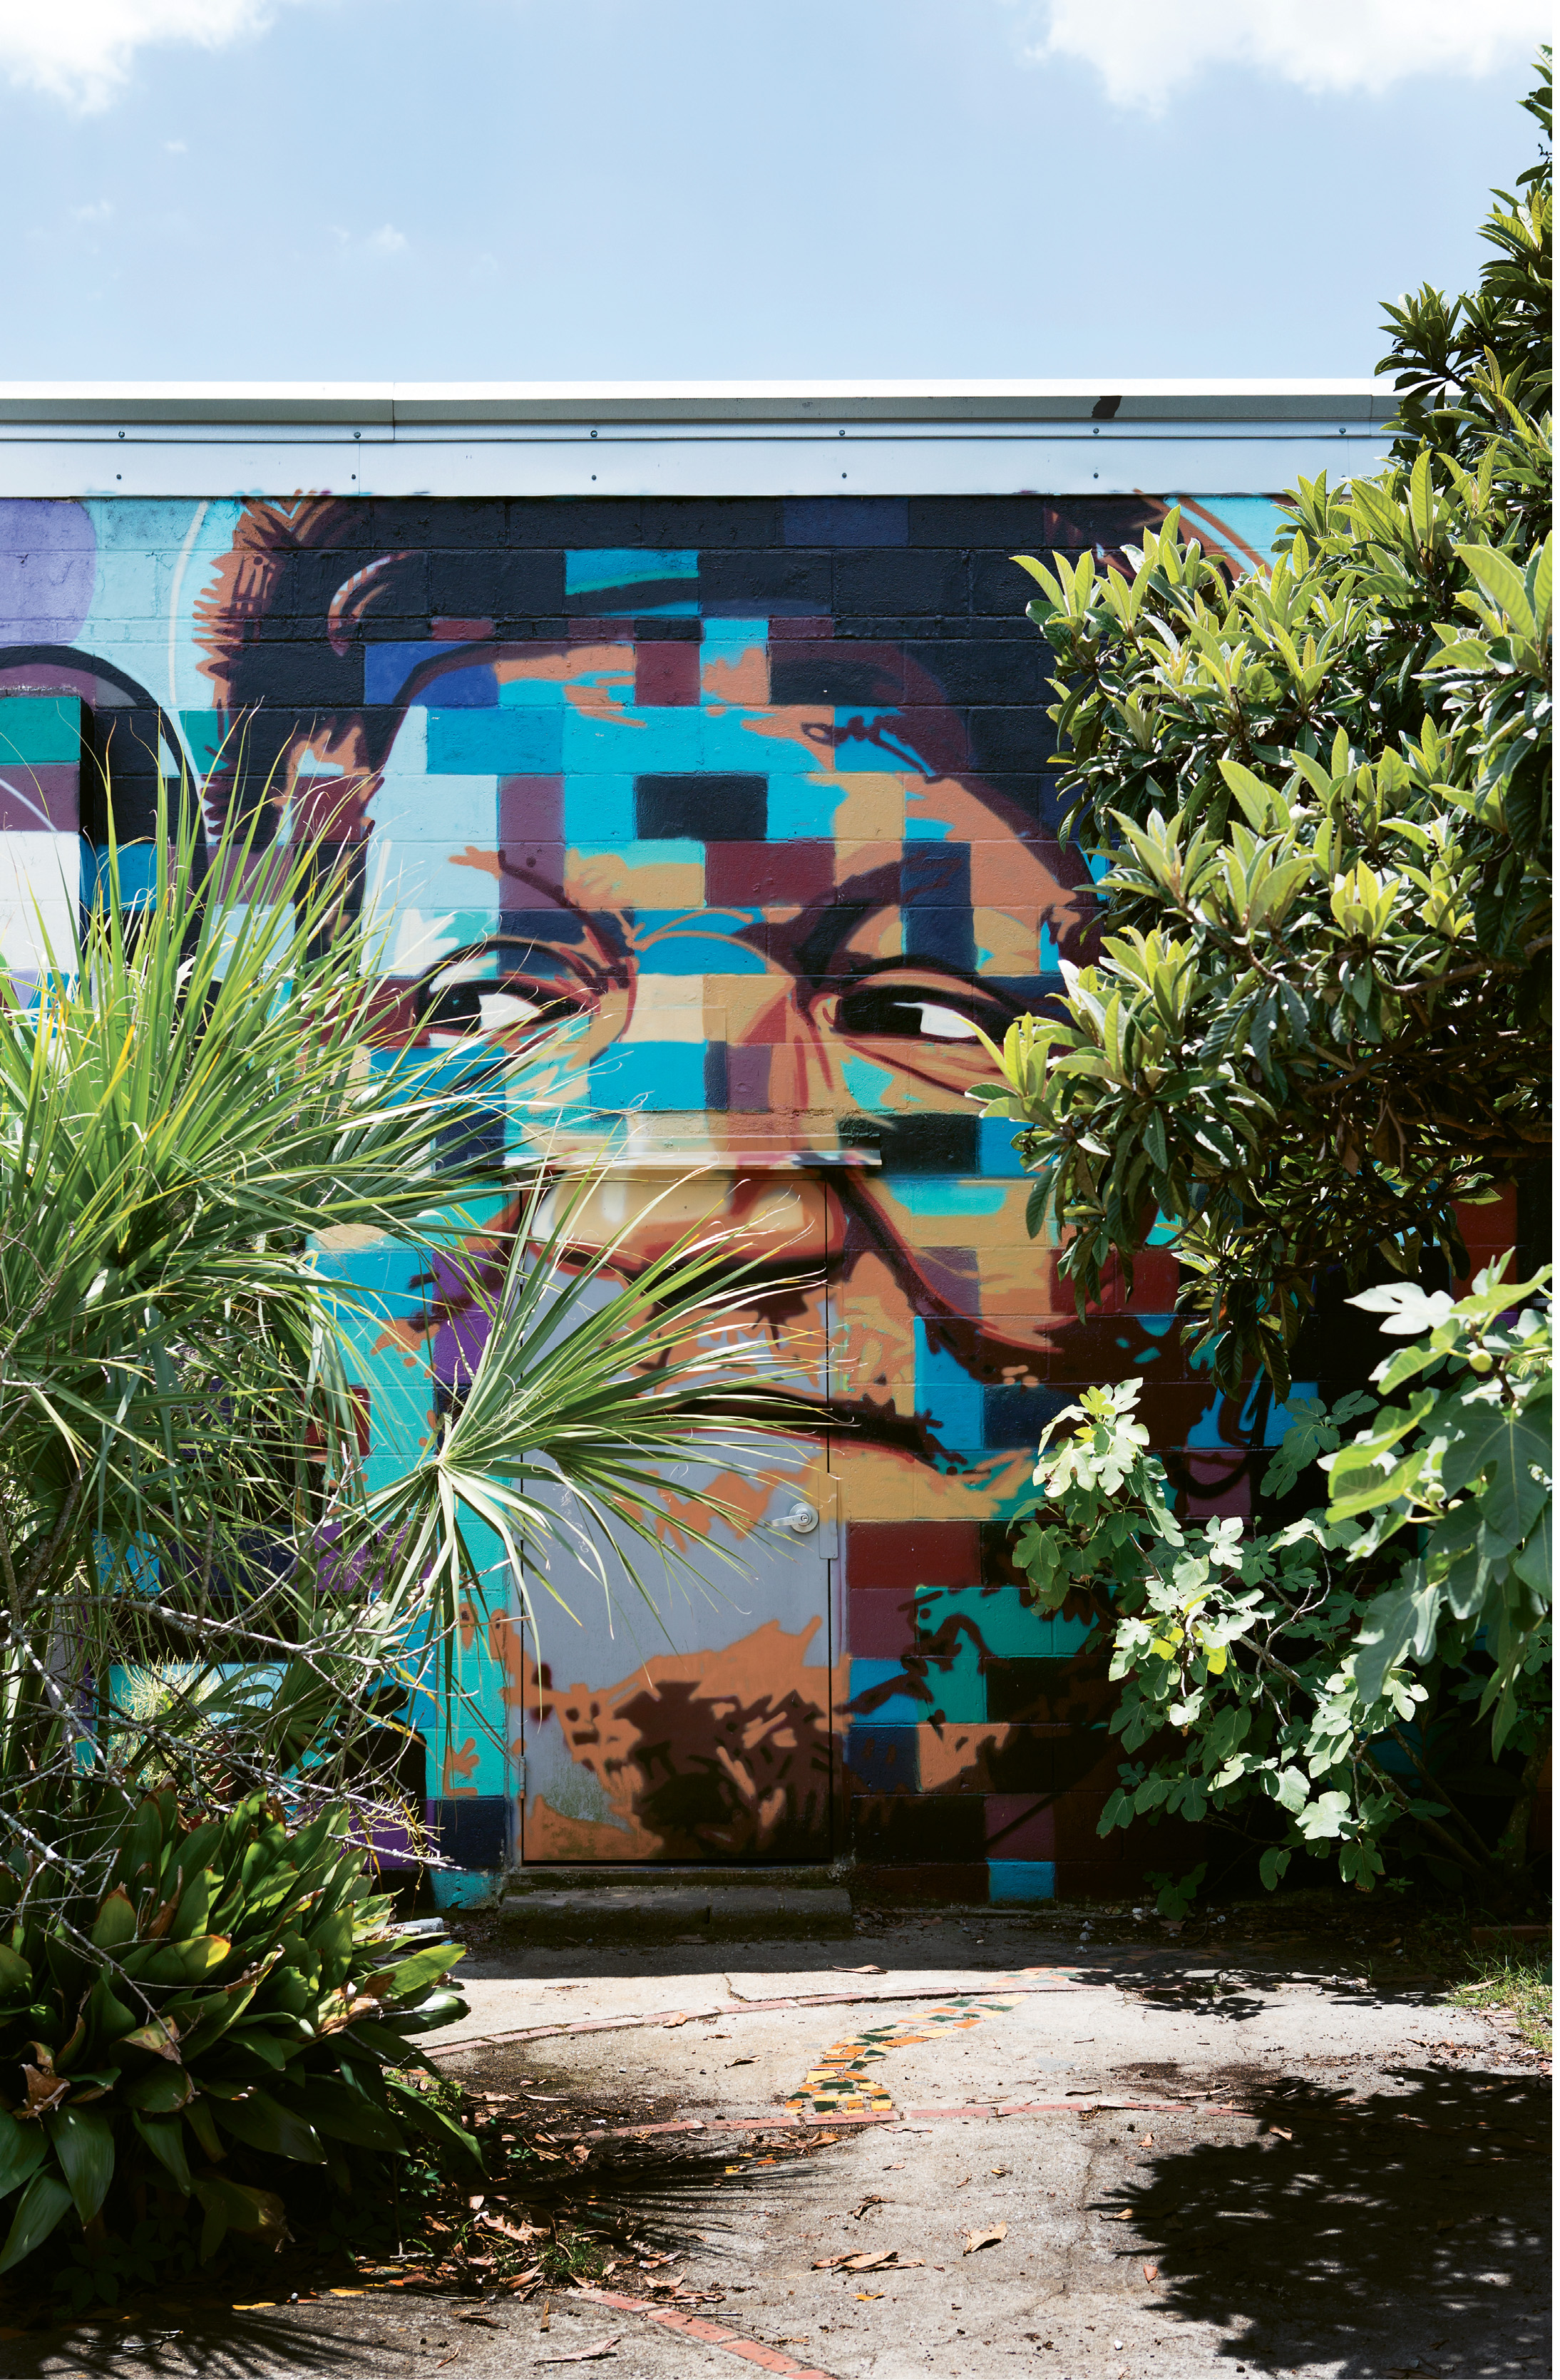 Redd Foxx (OPPOSITE)  By Sean Williams  Fall 2015  4845 Chateau ave.  The local artist, muralist, and metalsmith painted this homage to the comedian and star of the 1970s sitcom Sanford and Son on the studio he shares with Patch Whiskey.